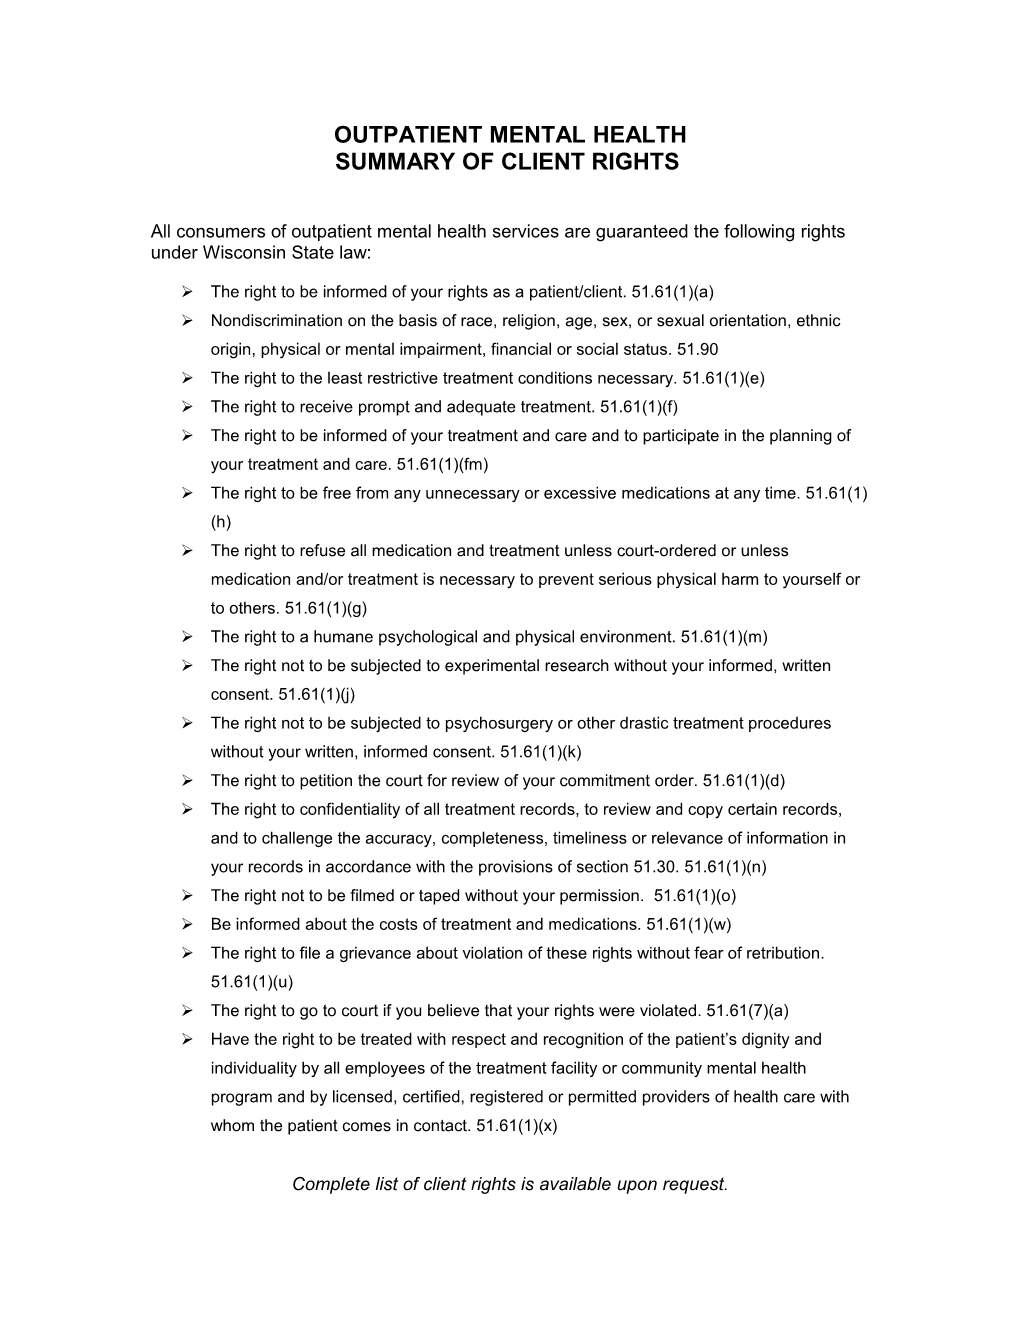 Client Rights Summary